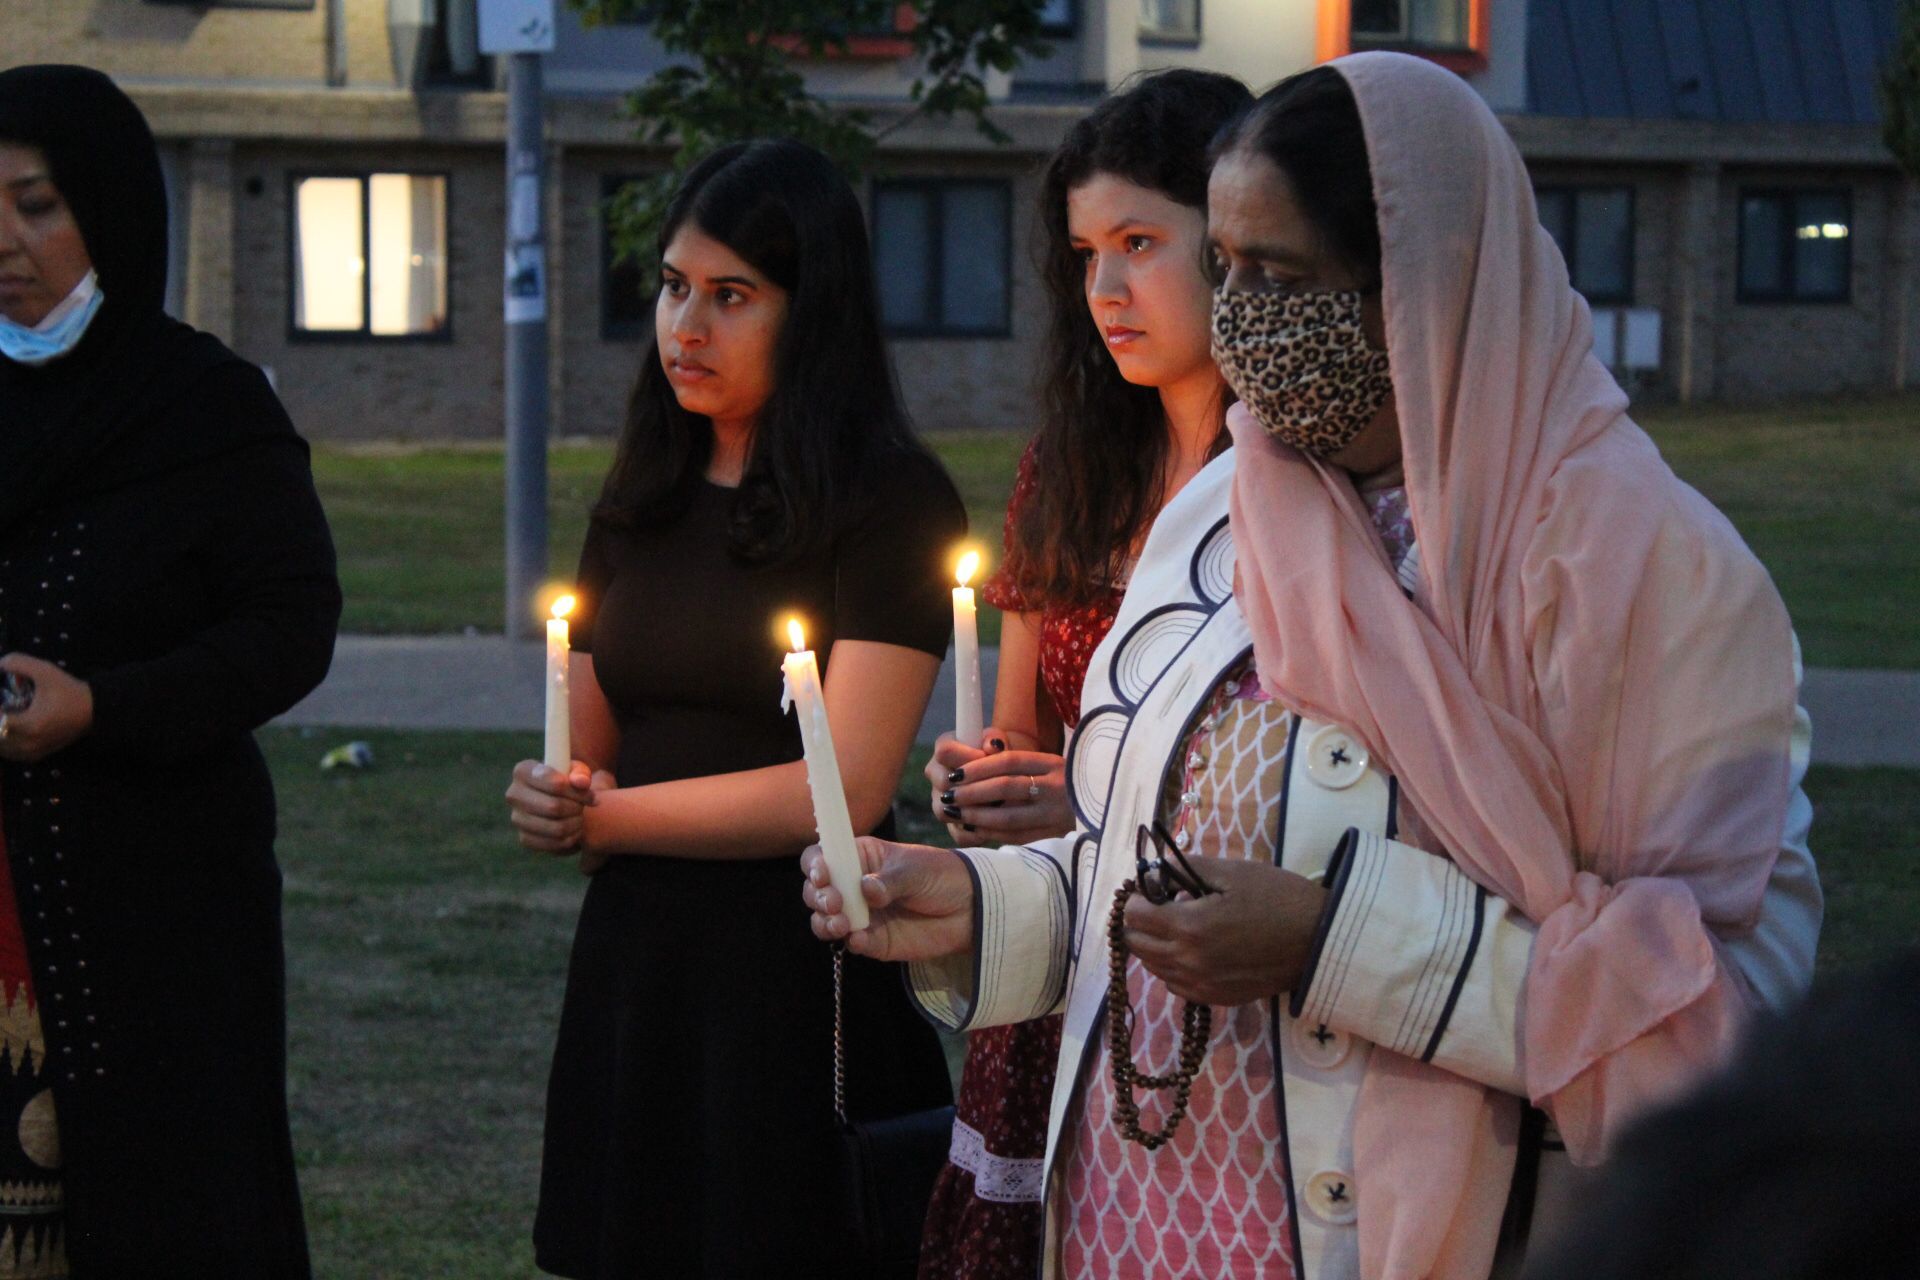 Candles were lit at the vigil for Sabina Nessa at Manzil Way Gardens, Oxford